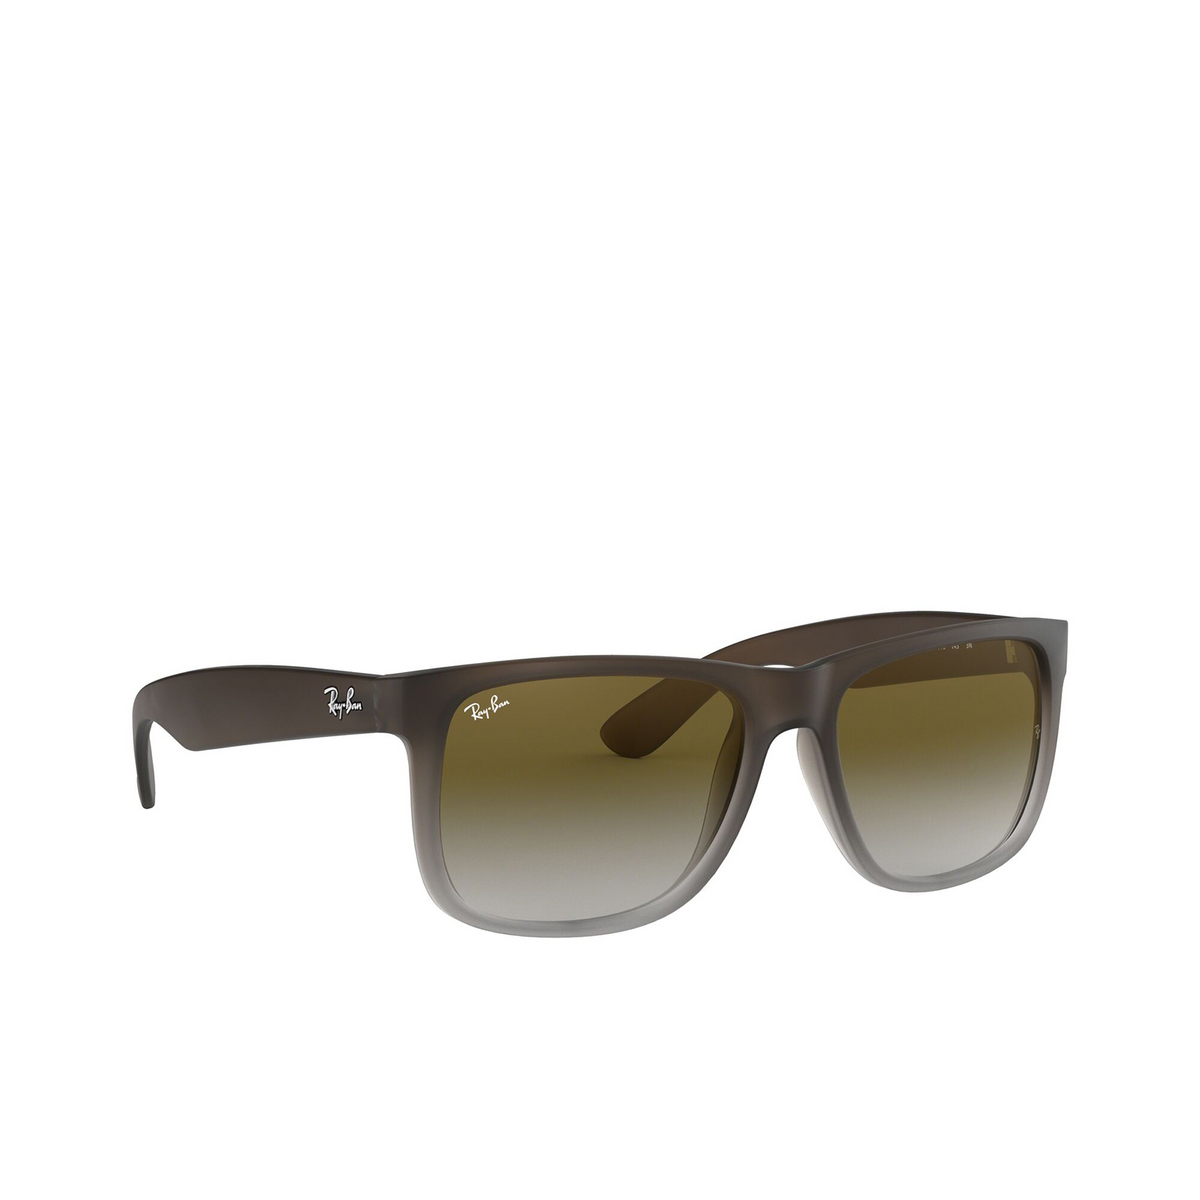 Ray-Ban JUSTIN Sunglasses 854/7Z Rubber Brown on Grey - three-quarters view